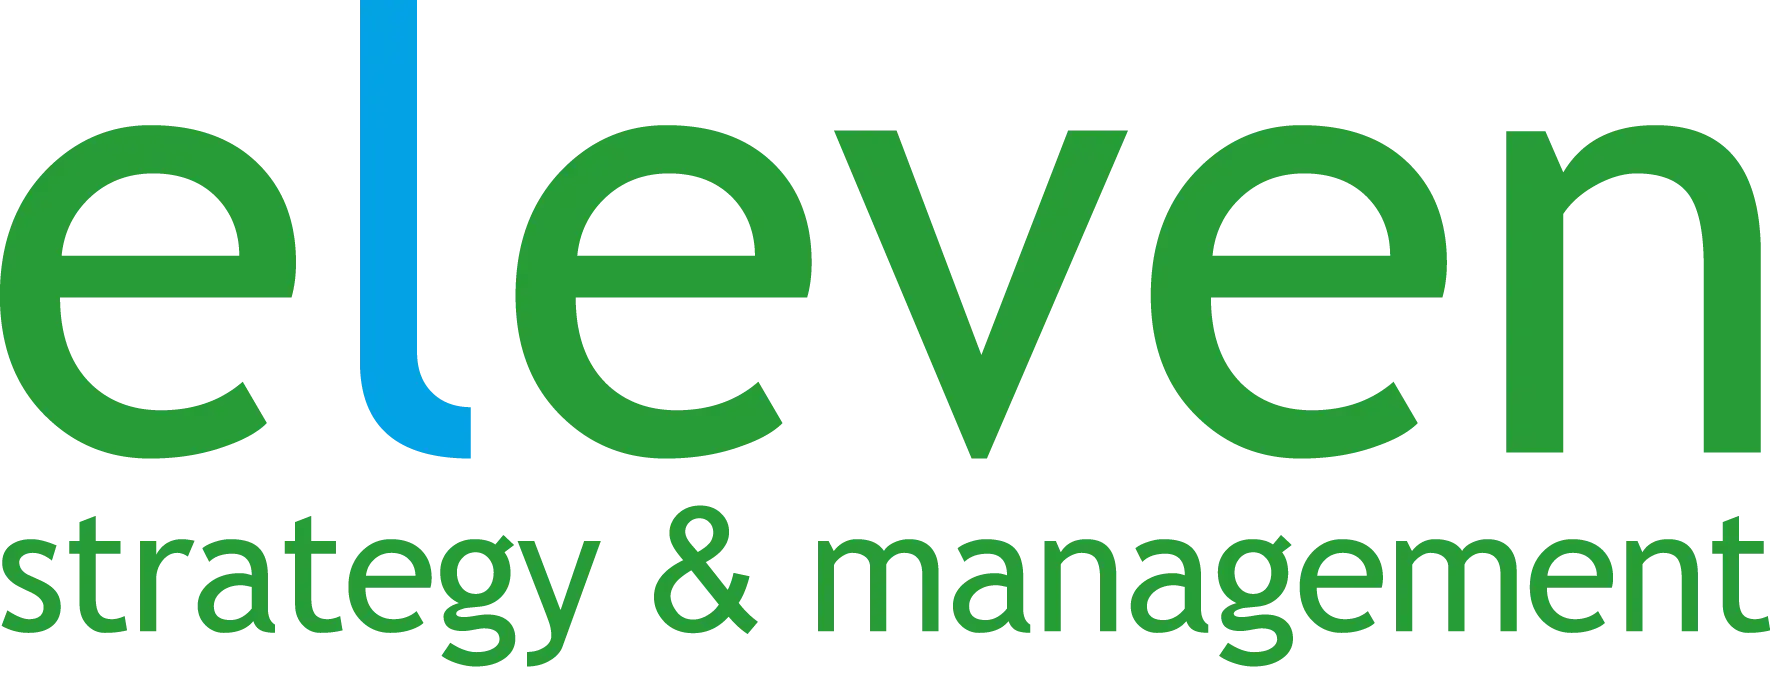 Logo eleven strategy & management consulting company